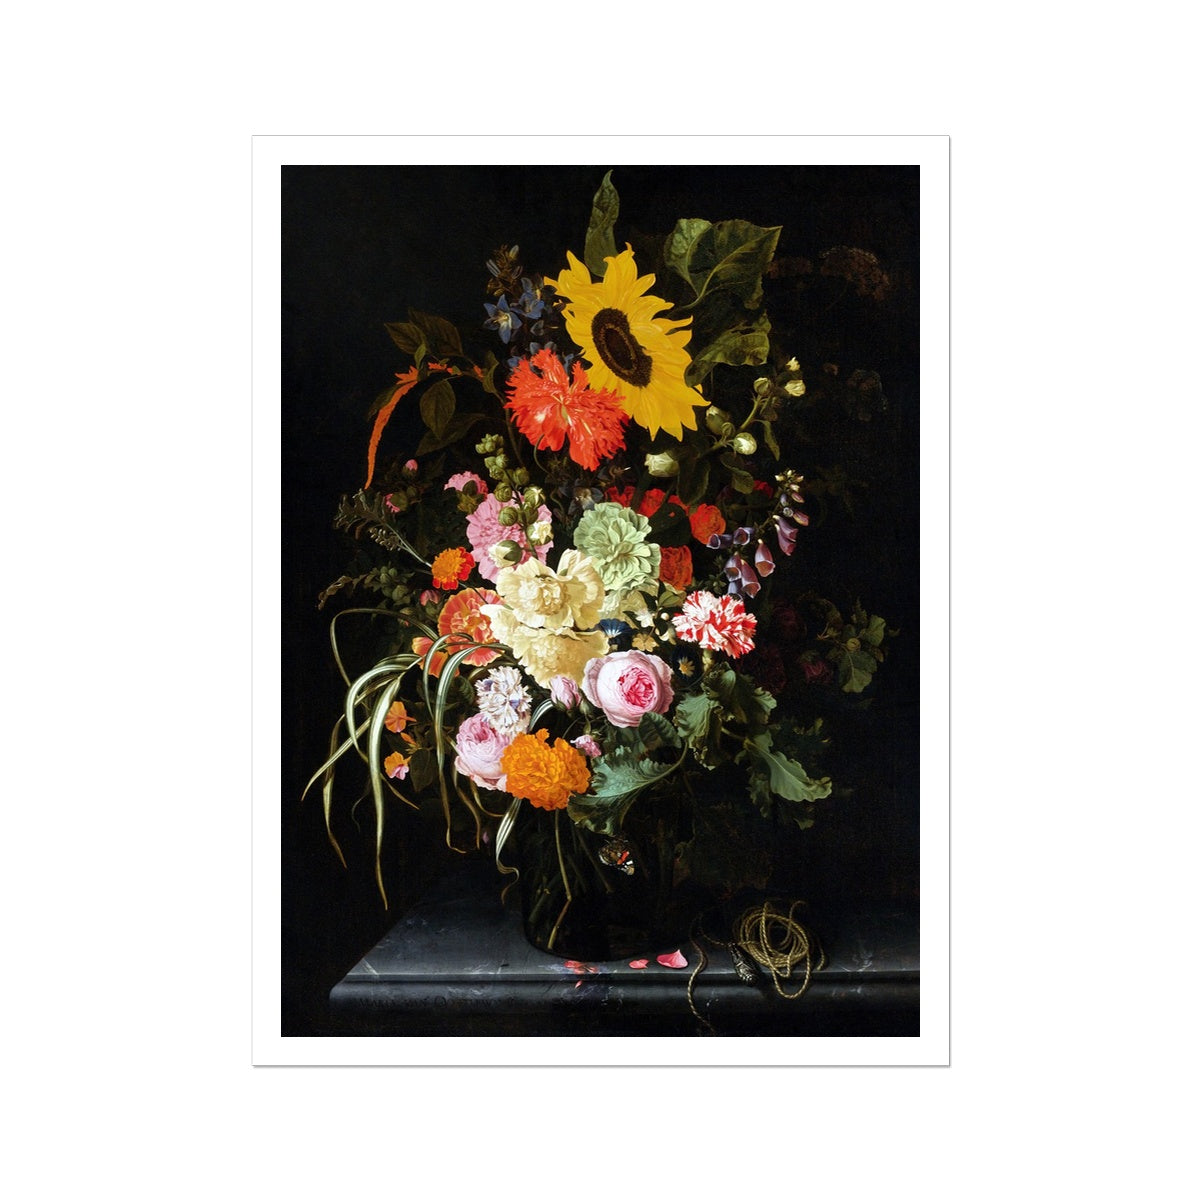 &#39;Roses, Carnation, Marigolds and other Flowers with a Sunflower and Striped Grass&#39;. Still Life by Maria van Oosterwijck. Open Edition Fine Art Print. Historic Art